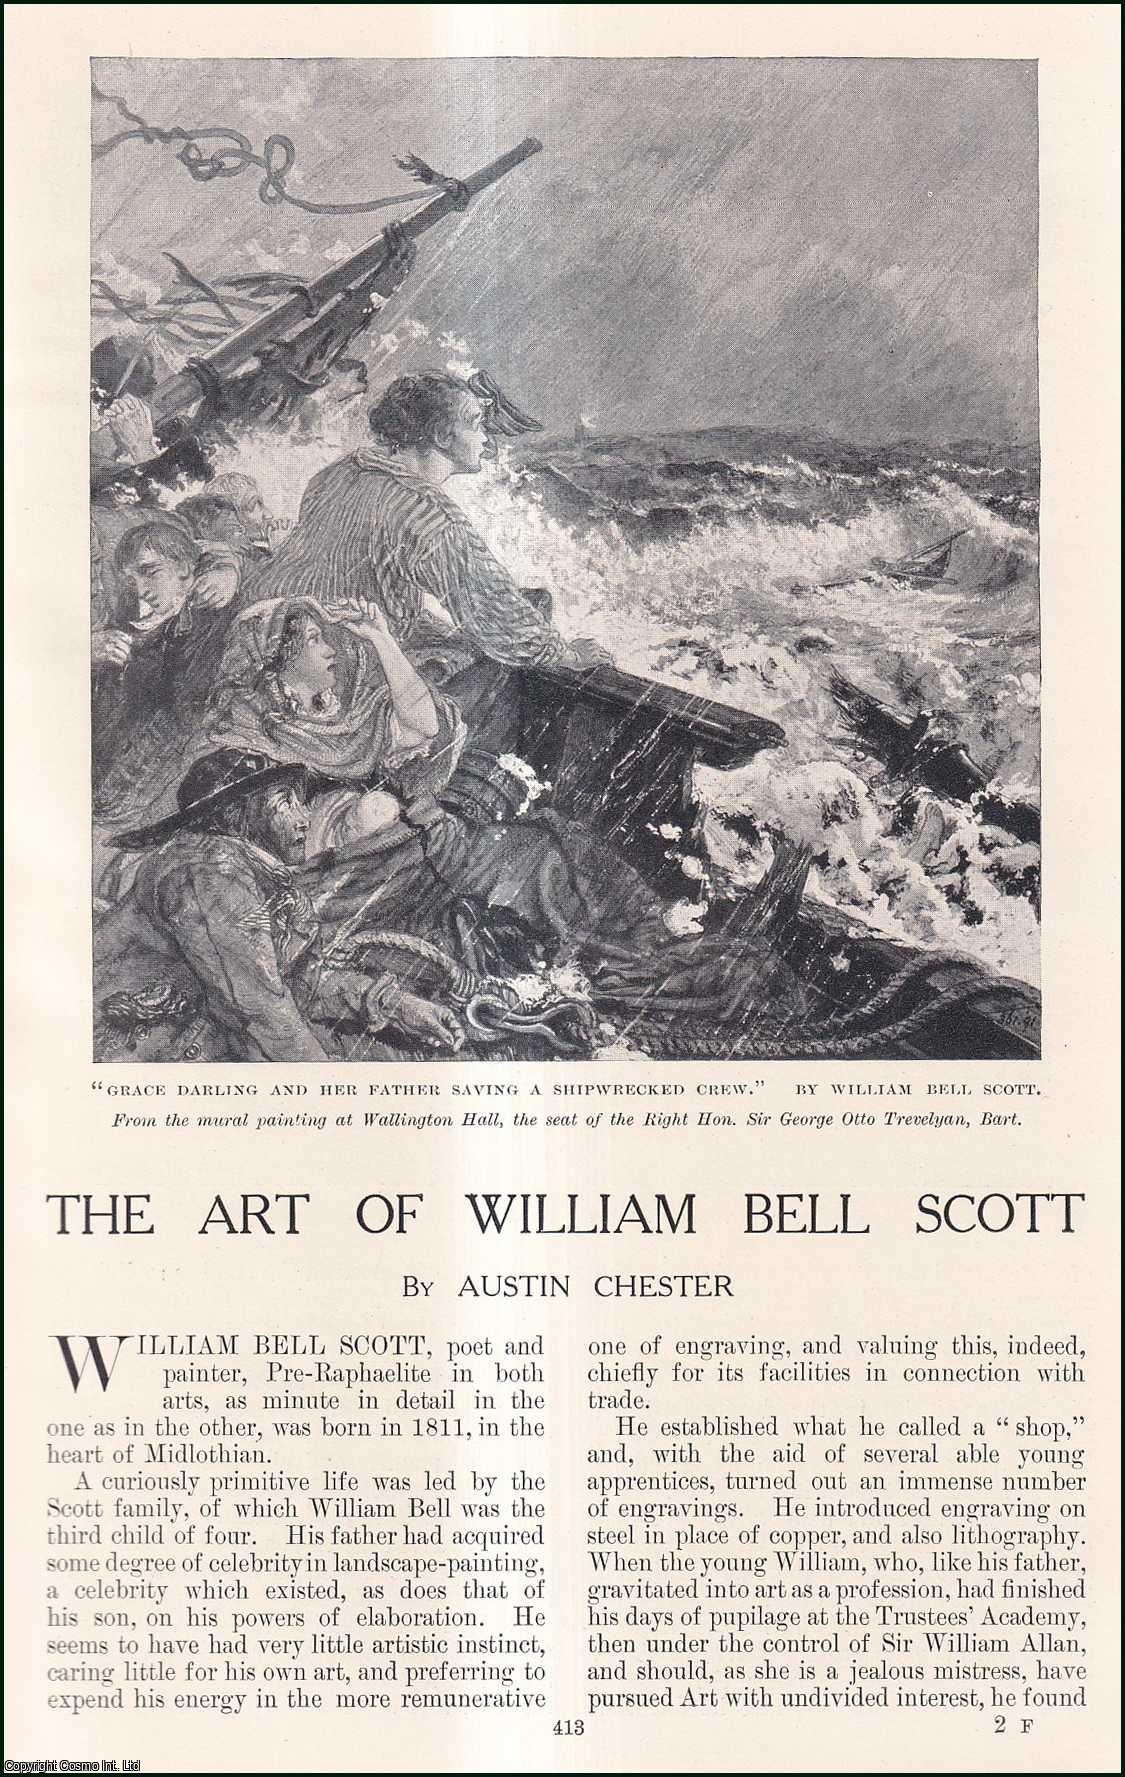 Austin Chester - The Art of William Bell Scott : Painter & Poet. An uncommon original article from the Windsor Magazine, 1914.